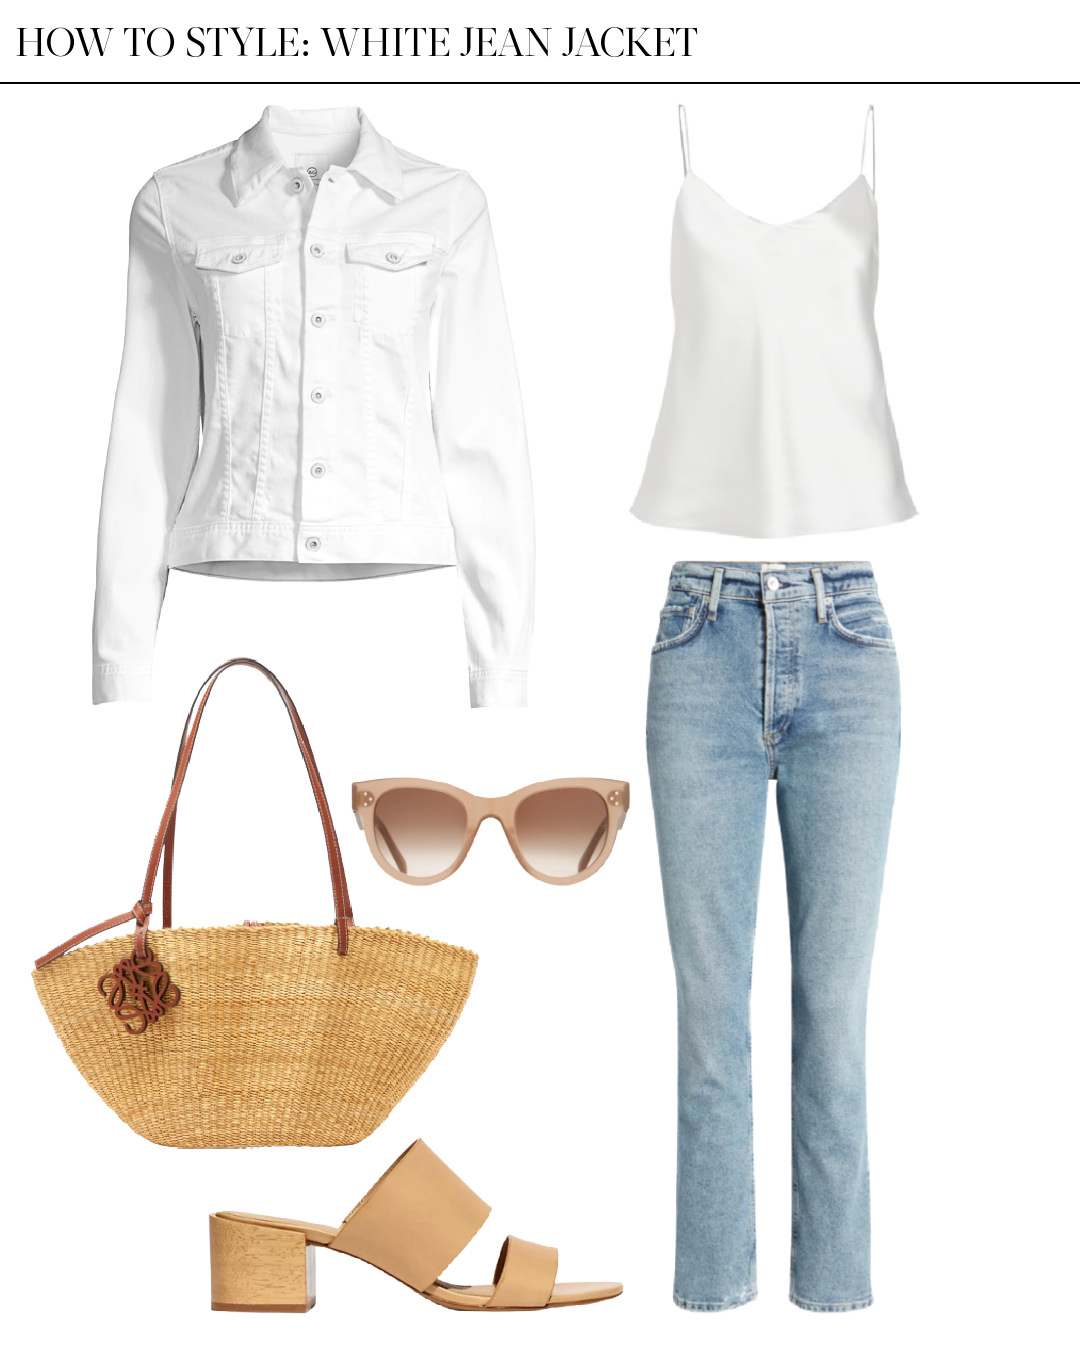 blue jeans and white jean jacket outfit 